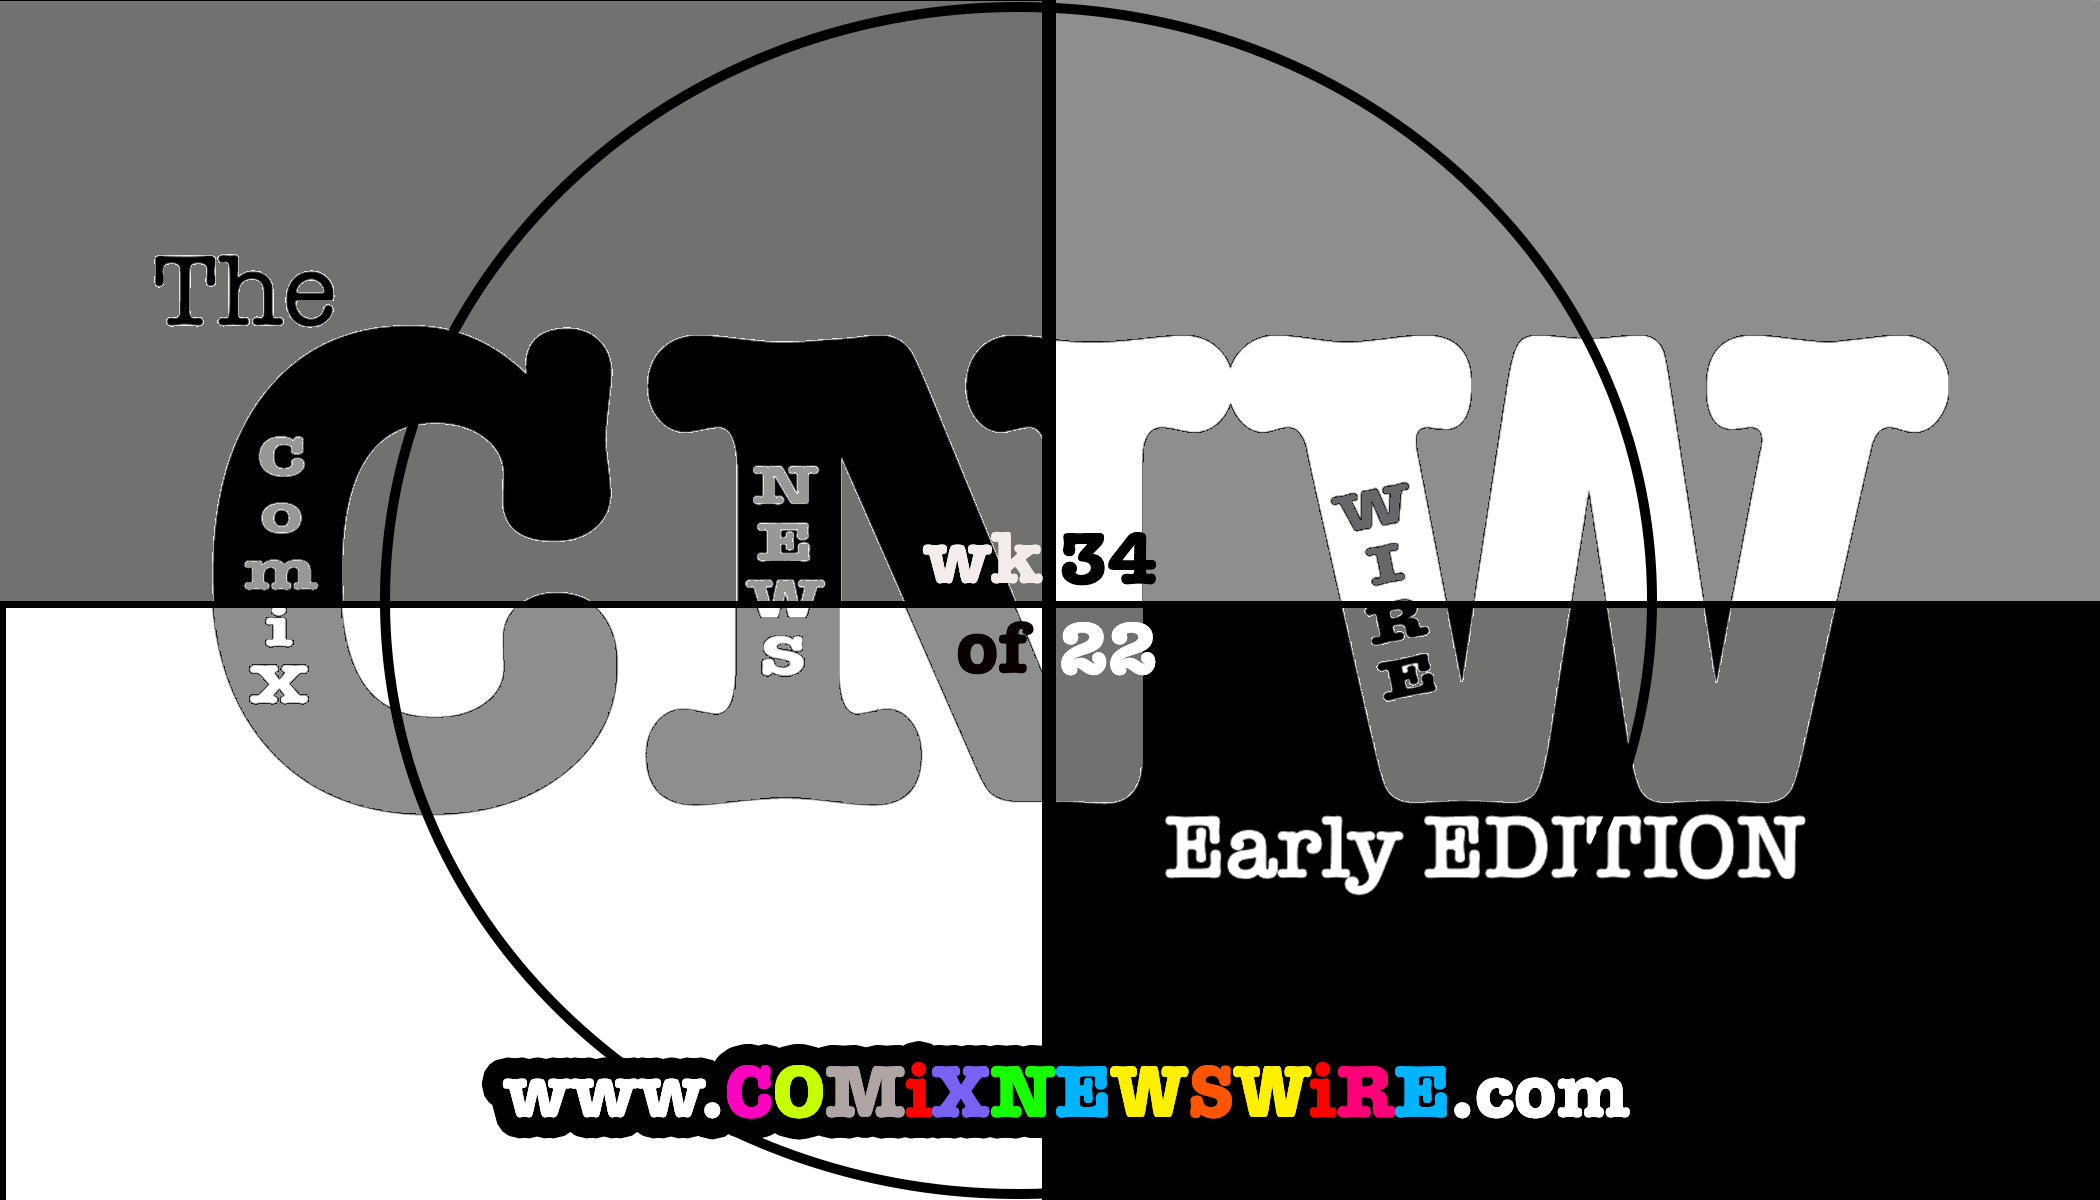 CNW EARLY EDITION wk 34 of 22